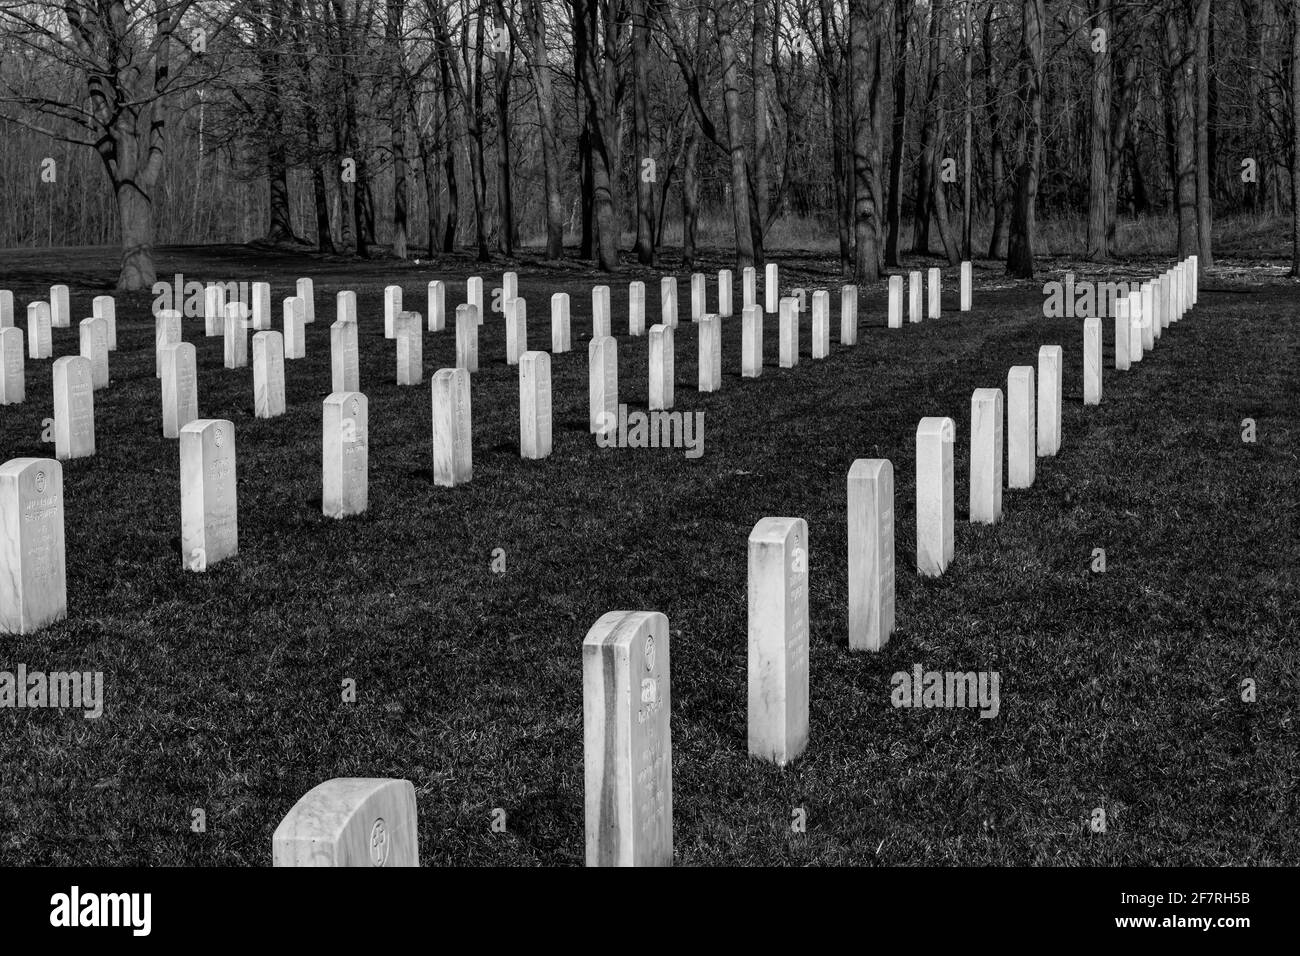 Rows of headstones for military veterans buried in Fort Custer National Cemetery, Augusta, Michigan, USA Stock Photo